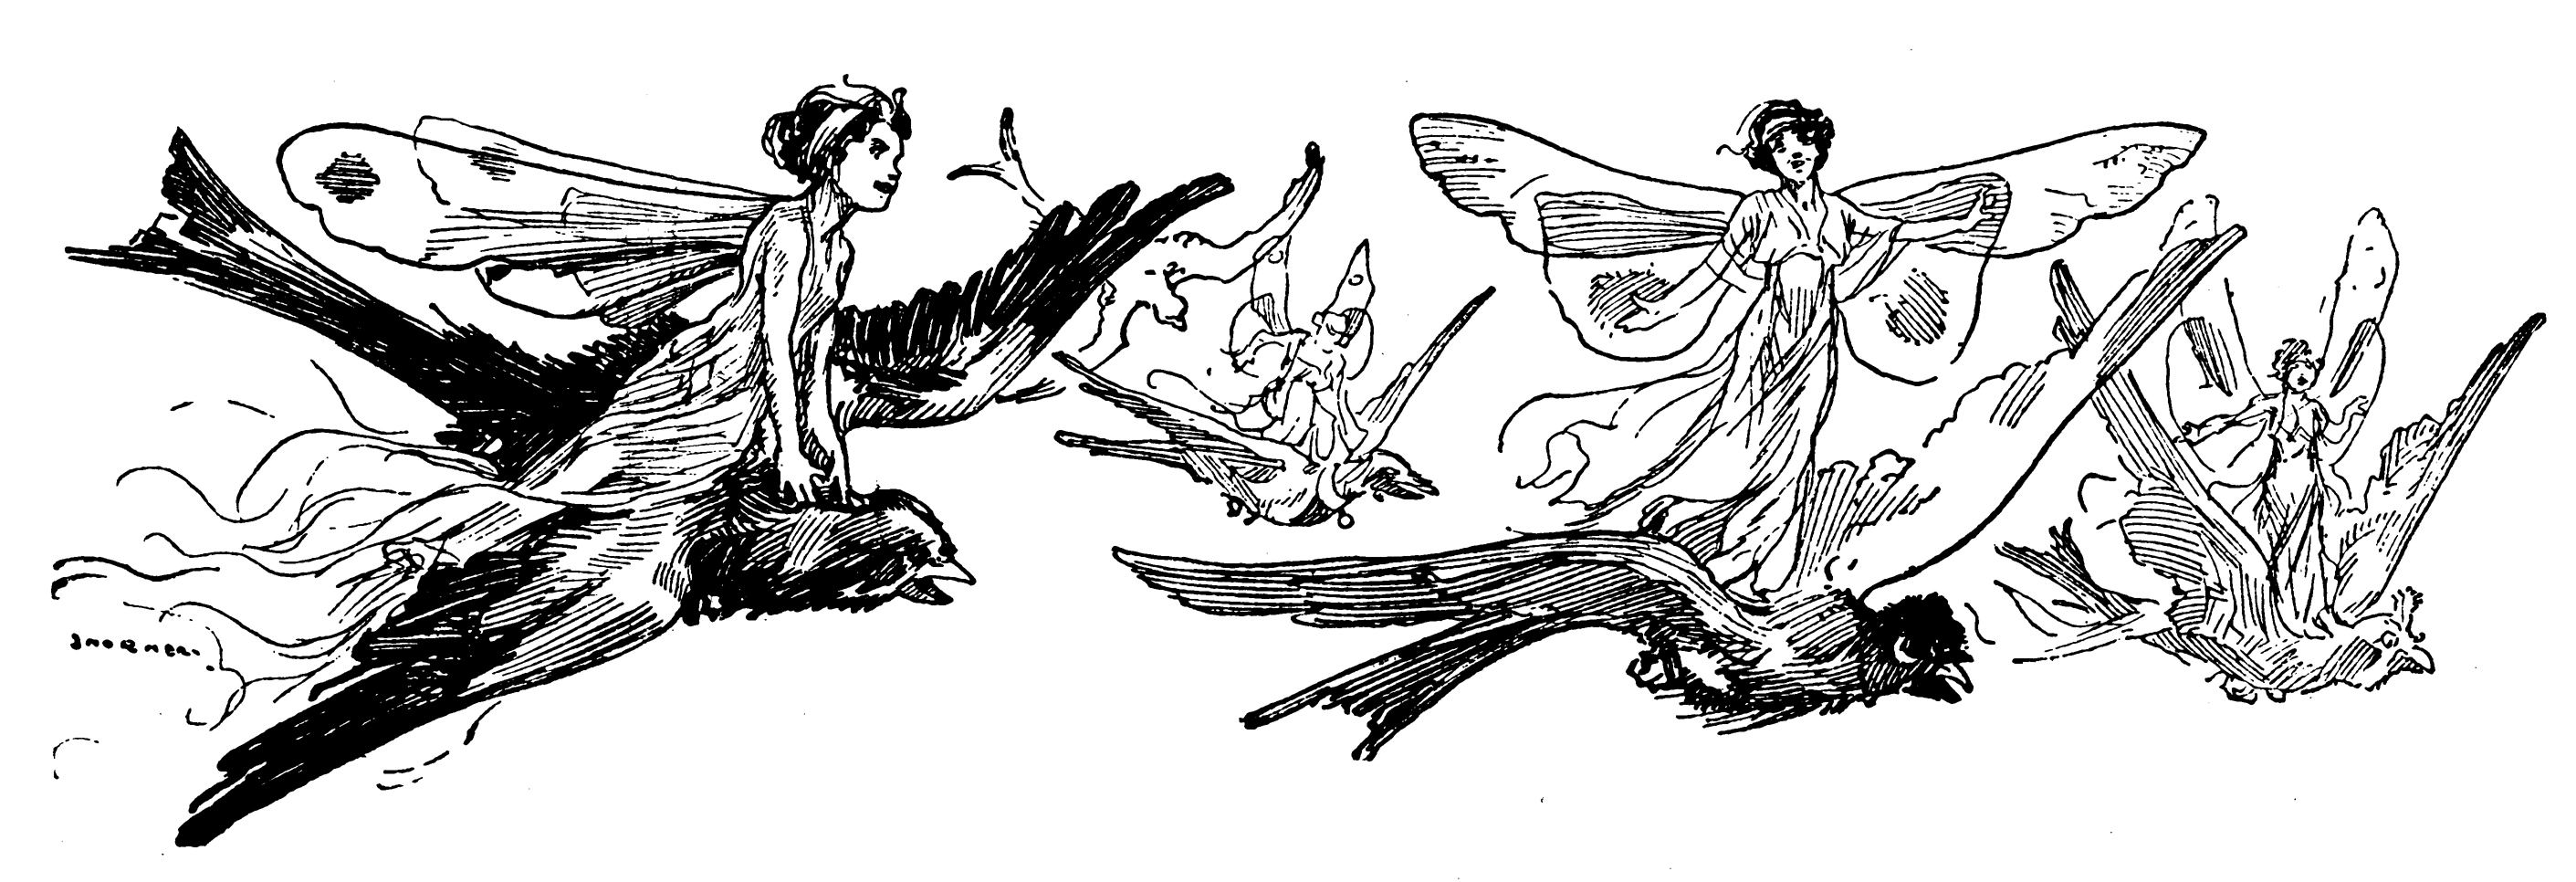 The Flower Fairies sing with the birds